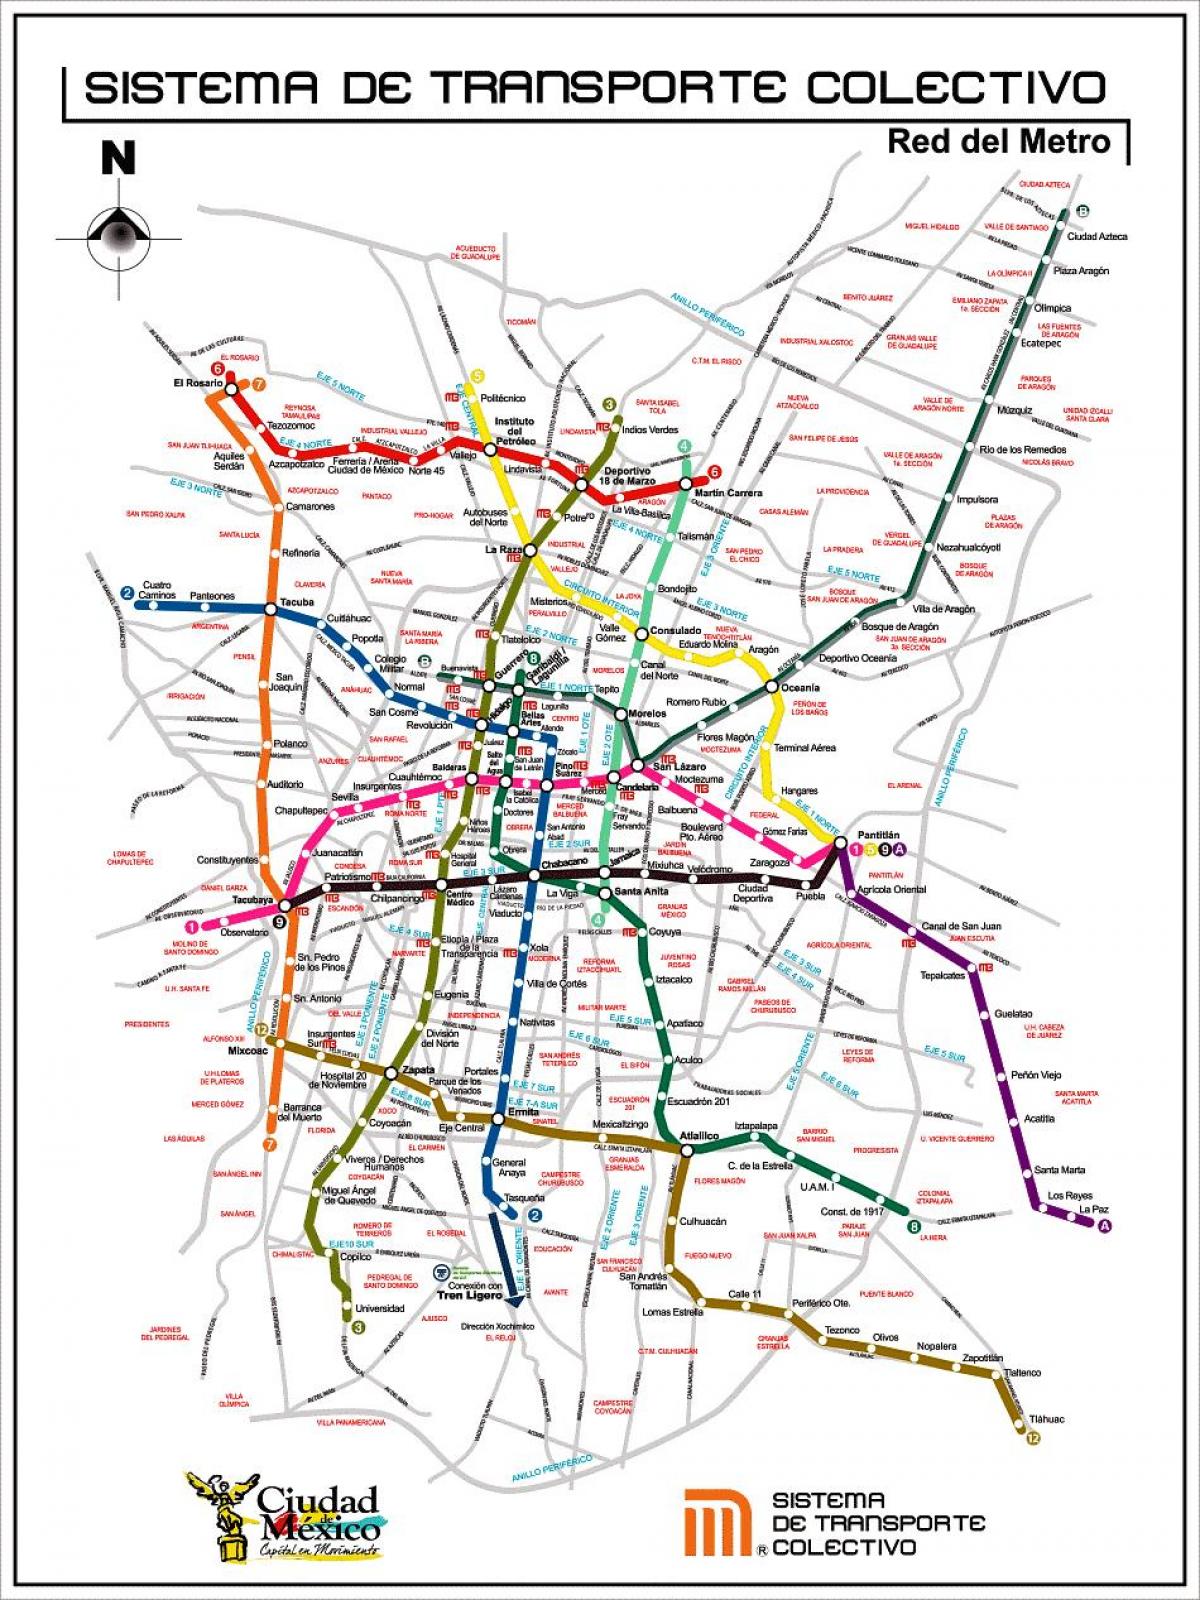 map of Mexico City transit